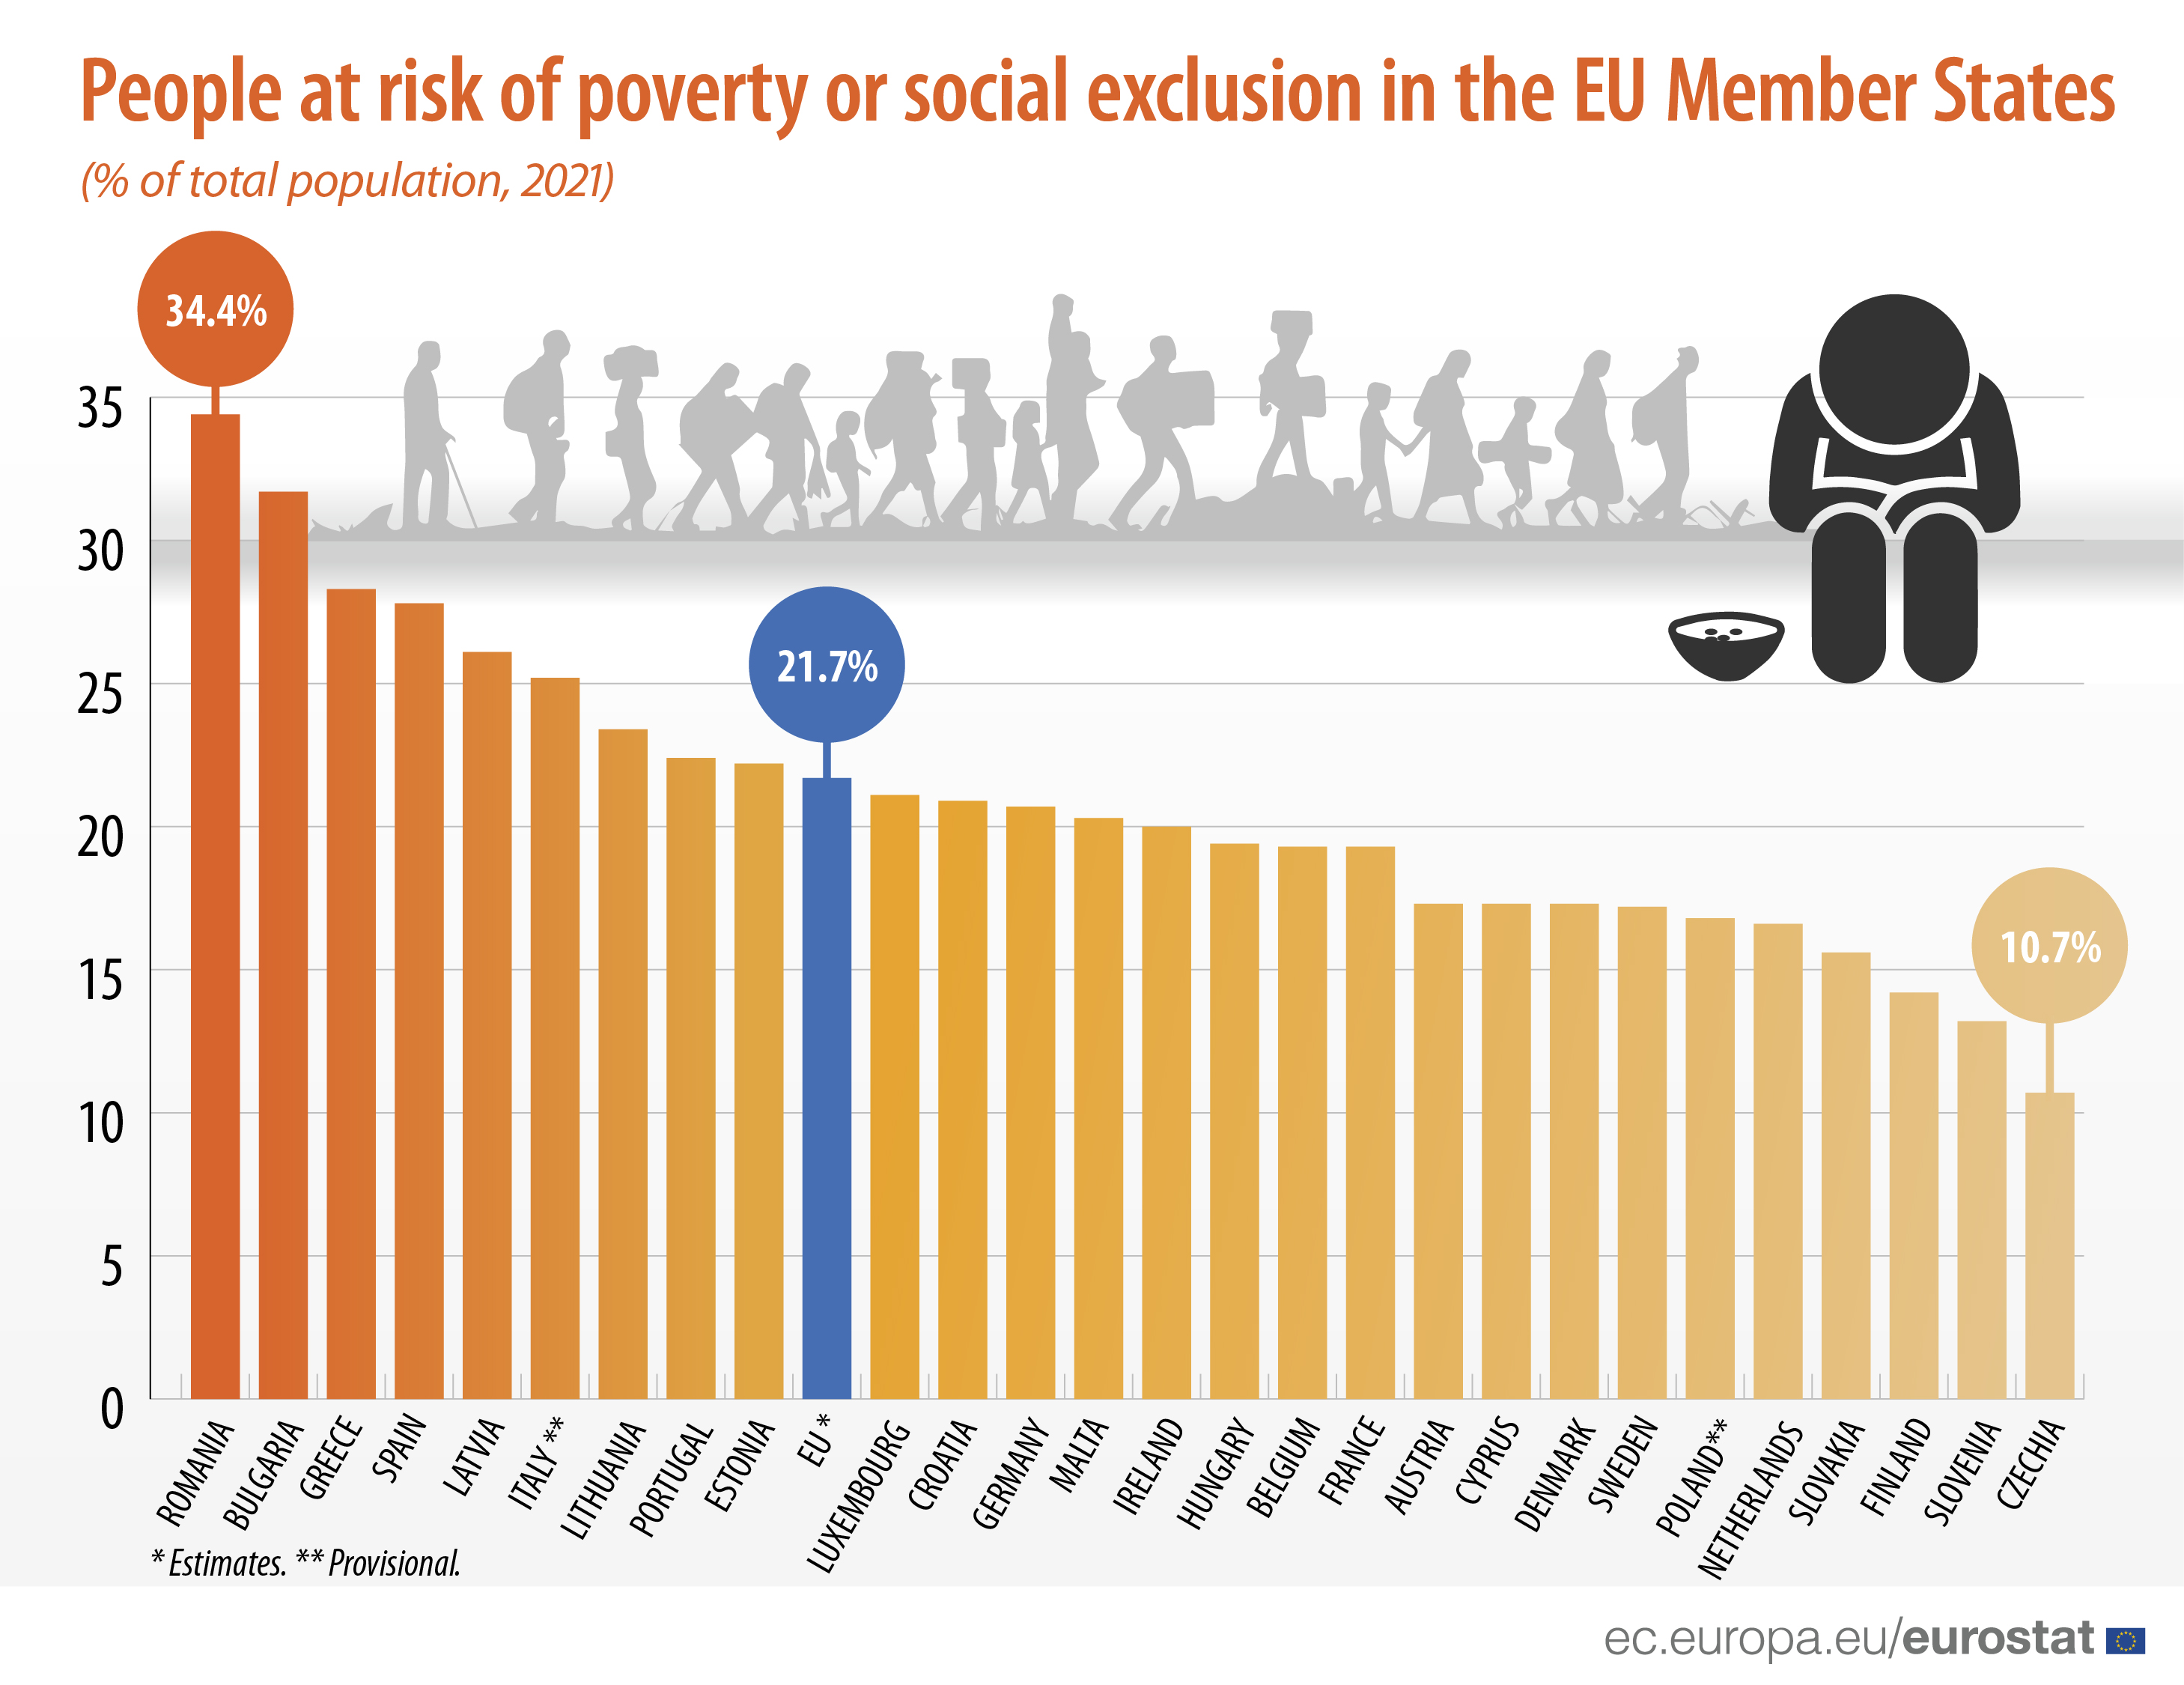 Bar graph: People at risk of poverty or social exclusion in the EU Member States, as a % of total population in 2021